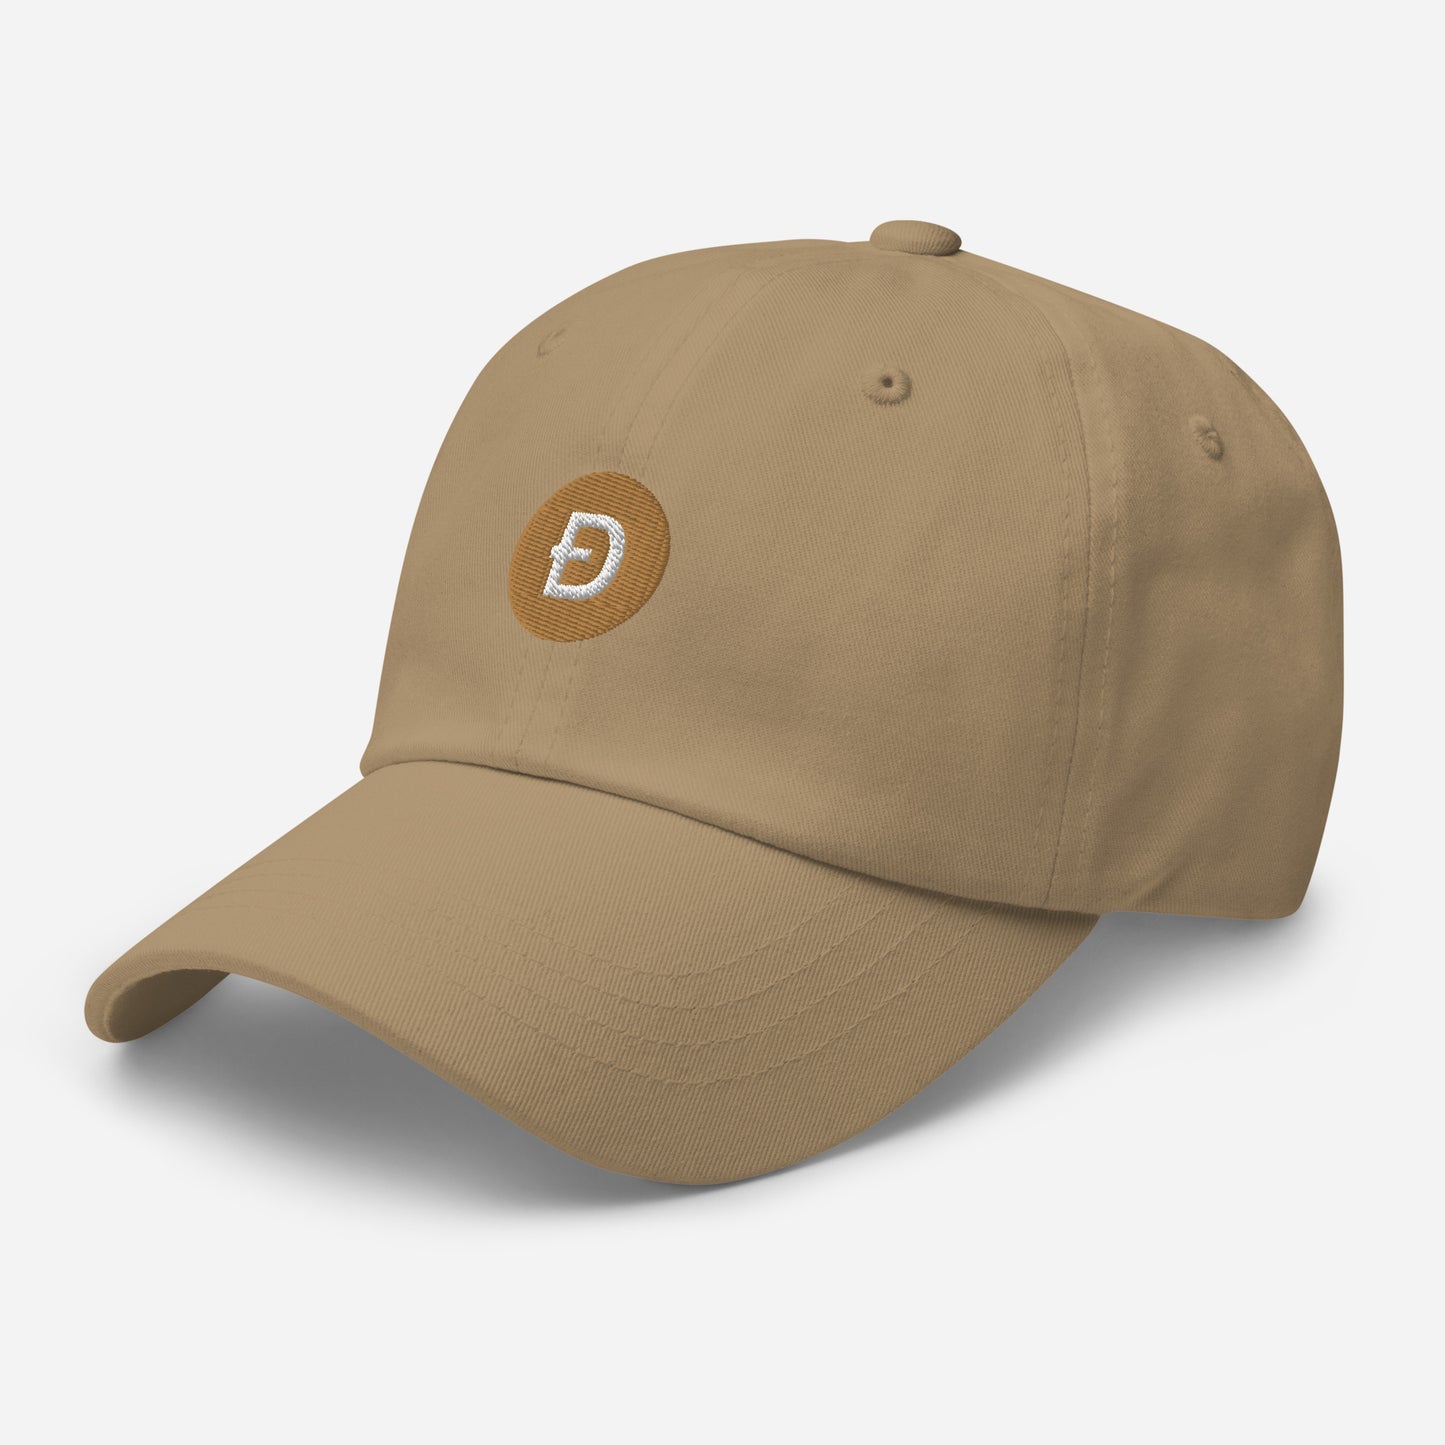 DOGECOIN (DOGE) - Fitted baseball cap